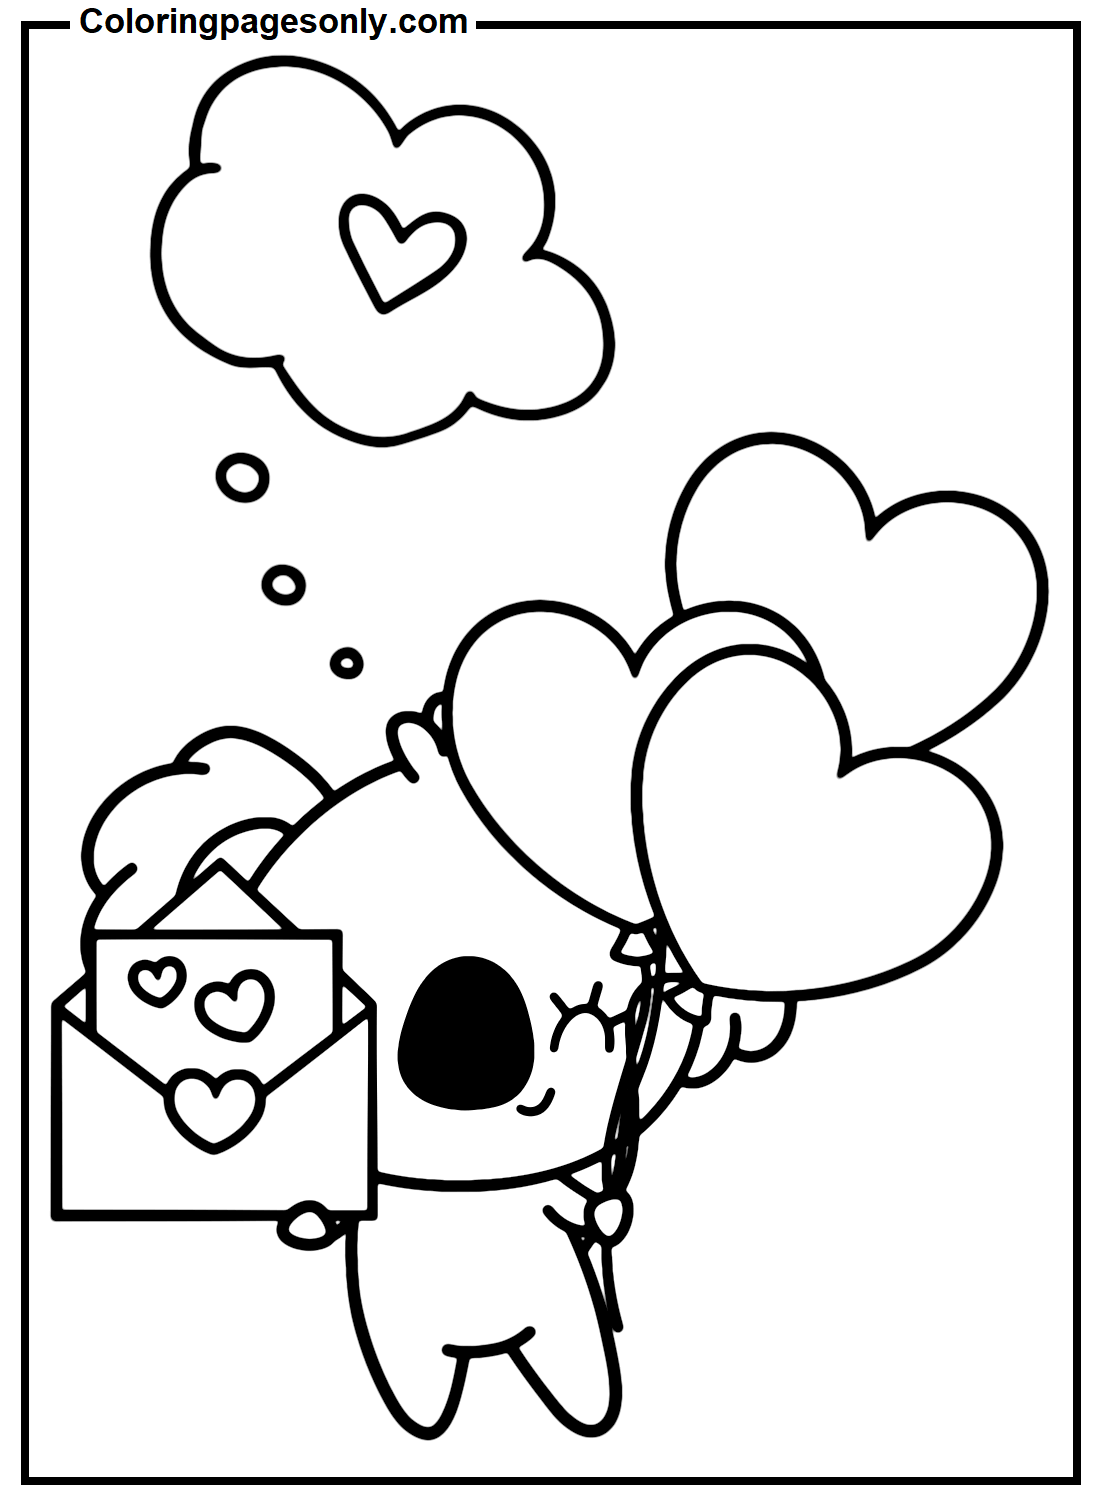 Koala Valentine's Day Coloring Pages